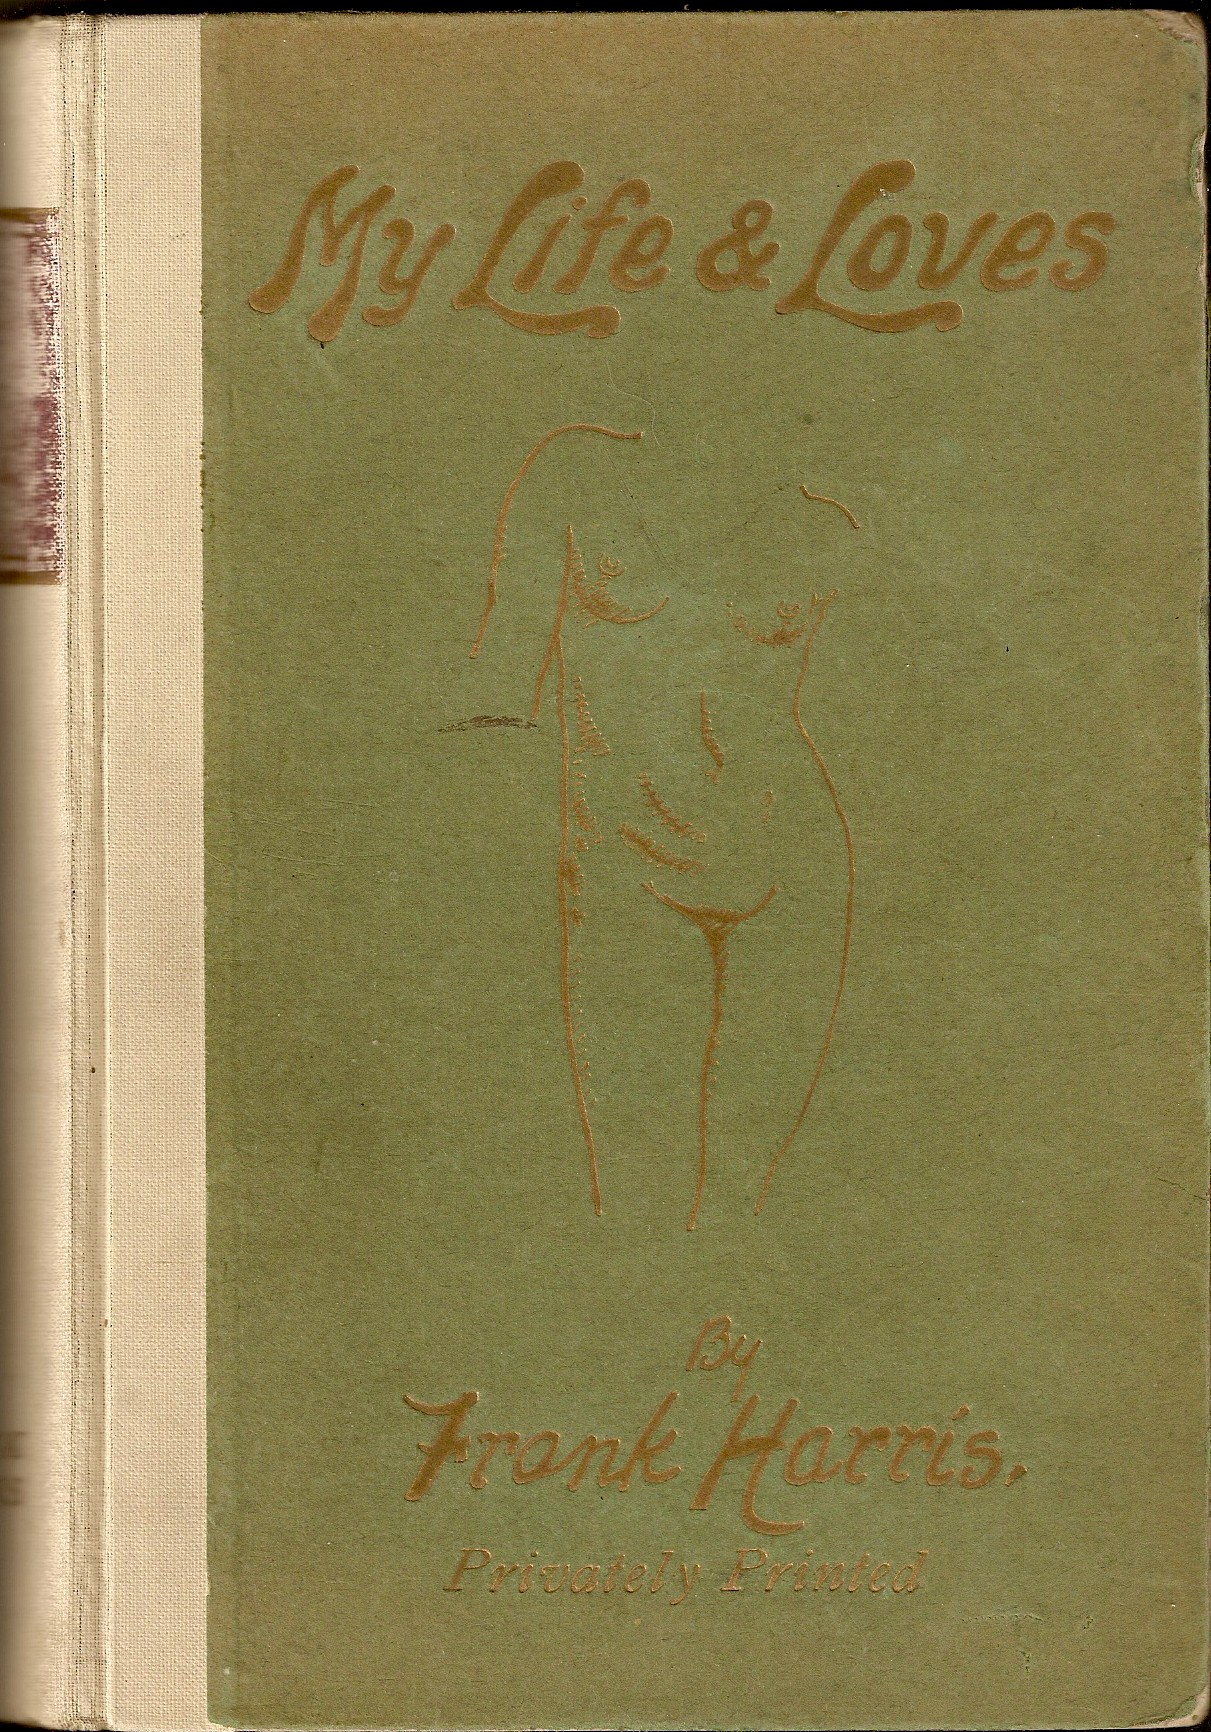 My Life & Loves by Frank Harris, Privately Printed